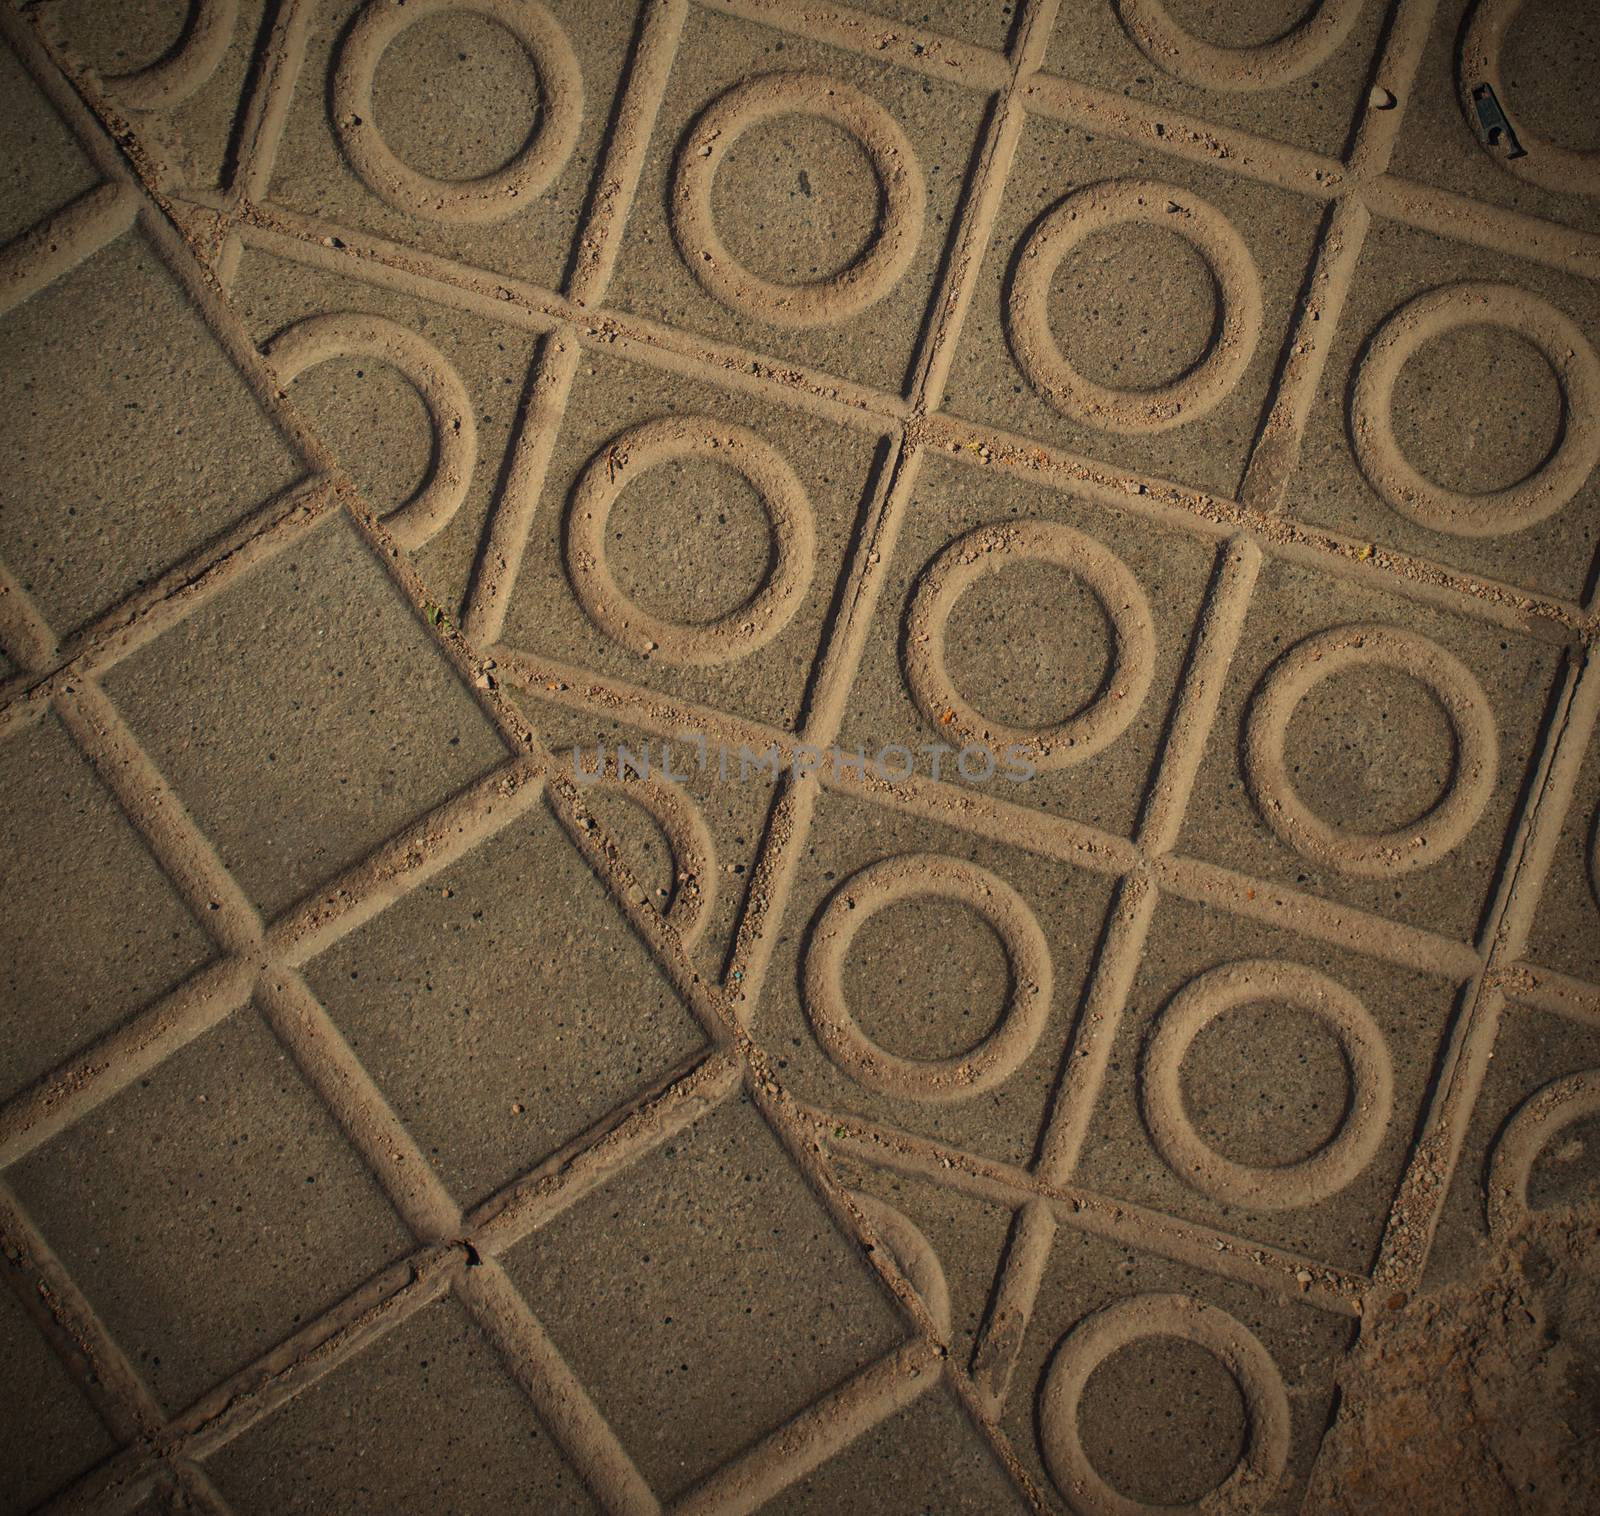 texture, ceramic surface of the pavement, instagram filter style